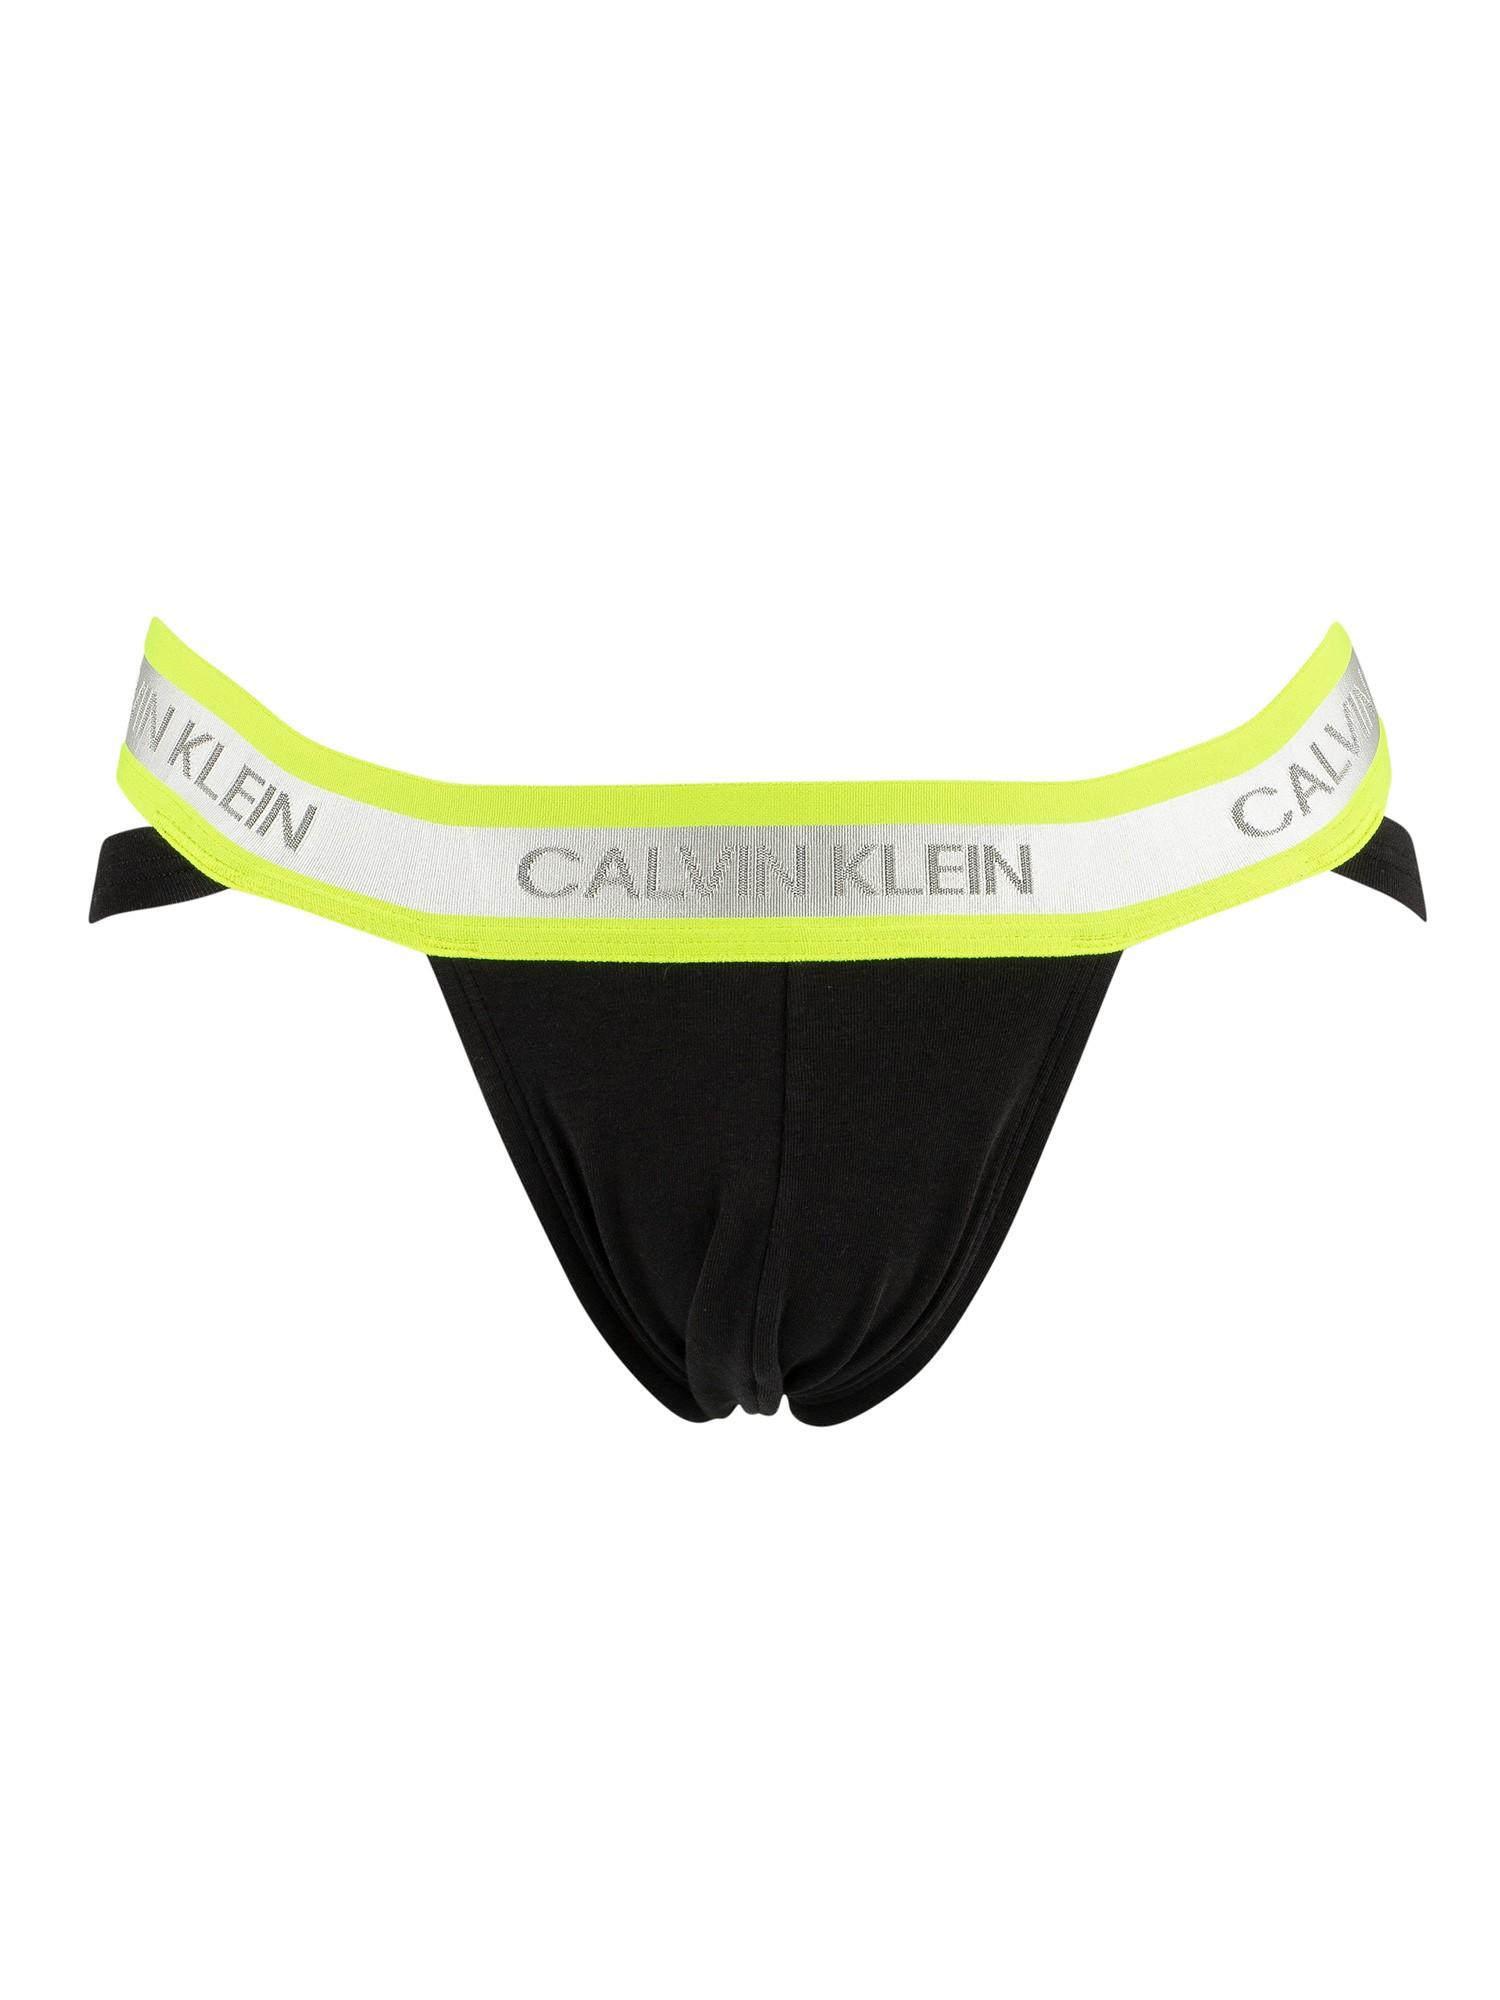 Calvin Klein Limited Edition Jock Strap in Yellow for Men - Lyst